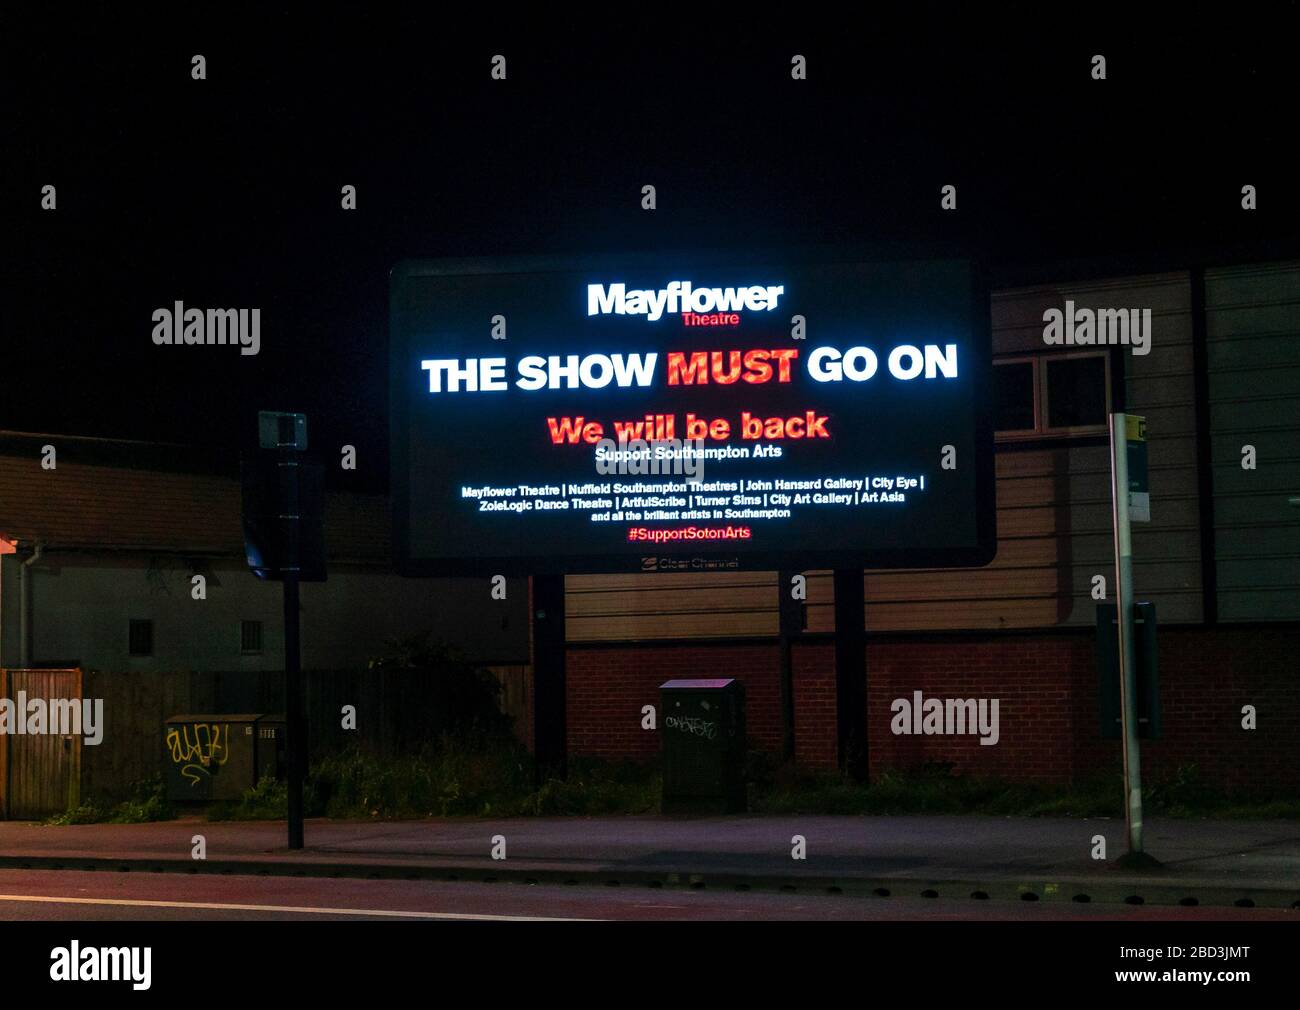 A digital billboard sign advertising the Mayflower Theatre in Southampton reads 'The Show must go on' during the Coronavirus lockdown at the height of the Covid-19 pandemic in April 2020, Southampton, England, UK Stock Photo